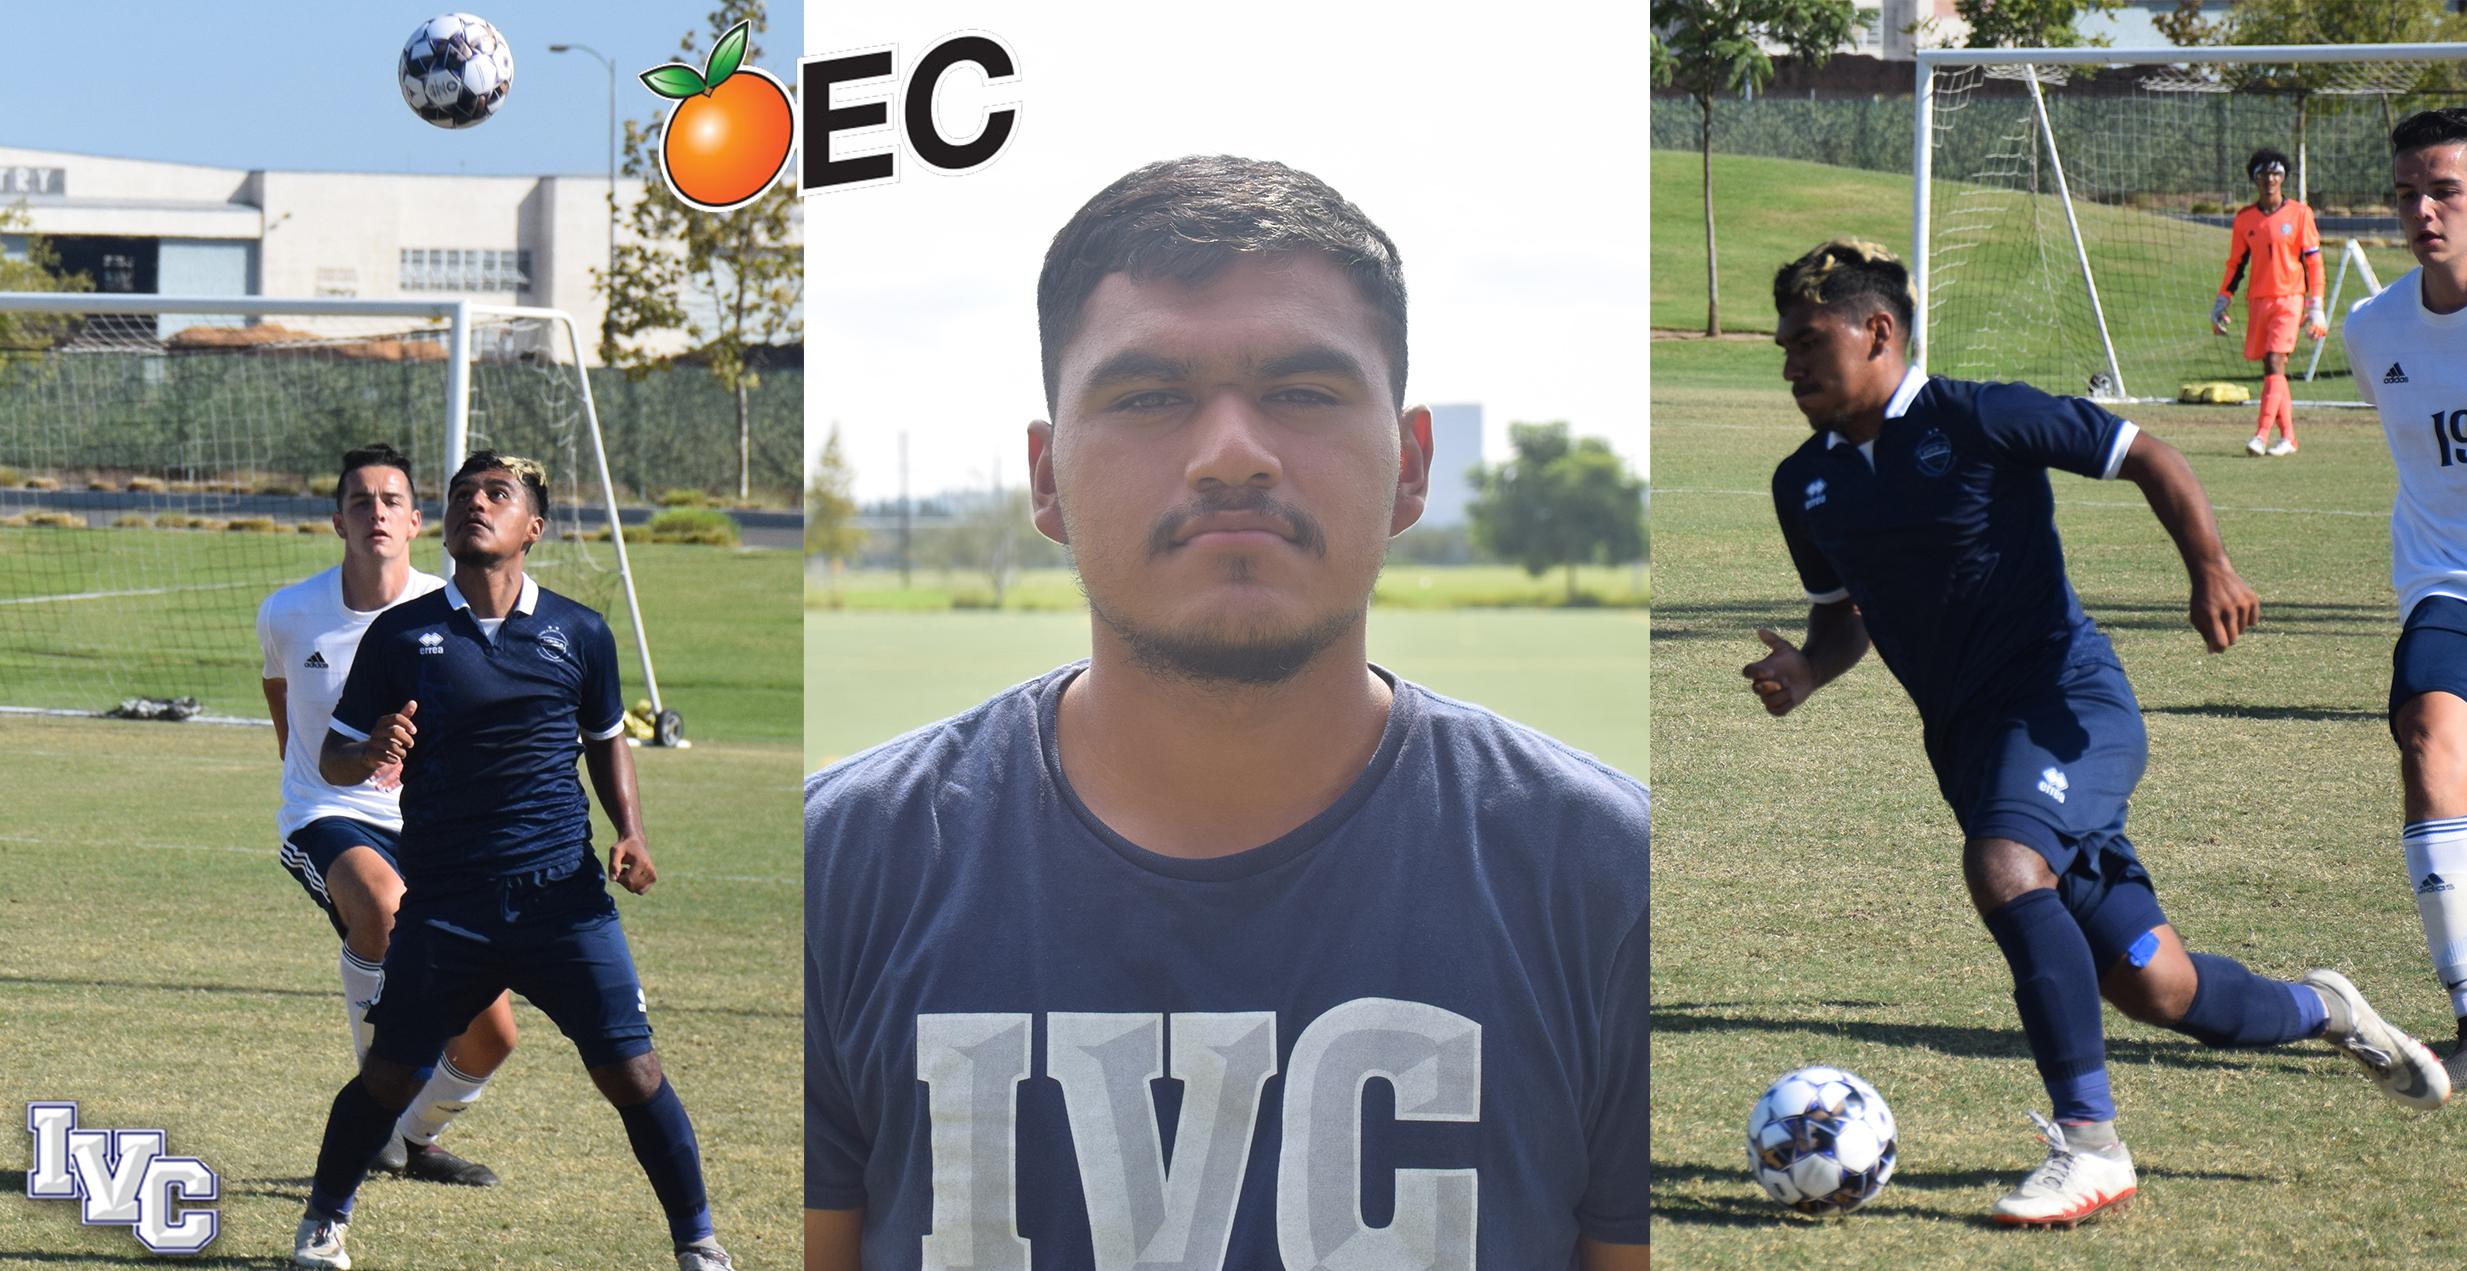 Lopez named OEC co-MVP and three others make first team